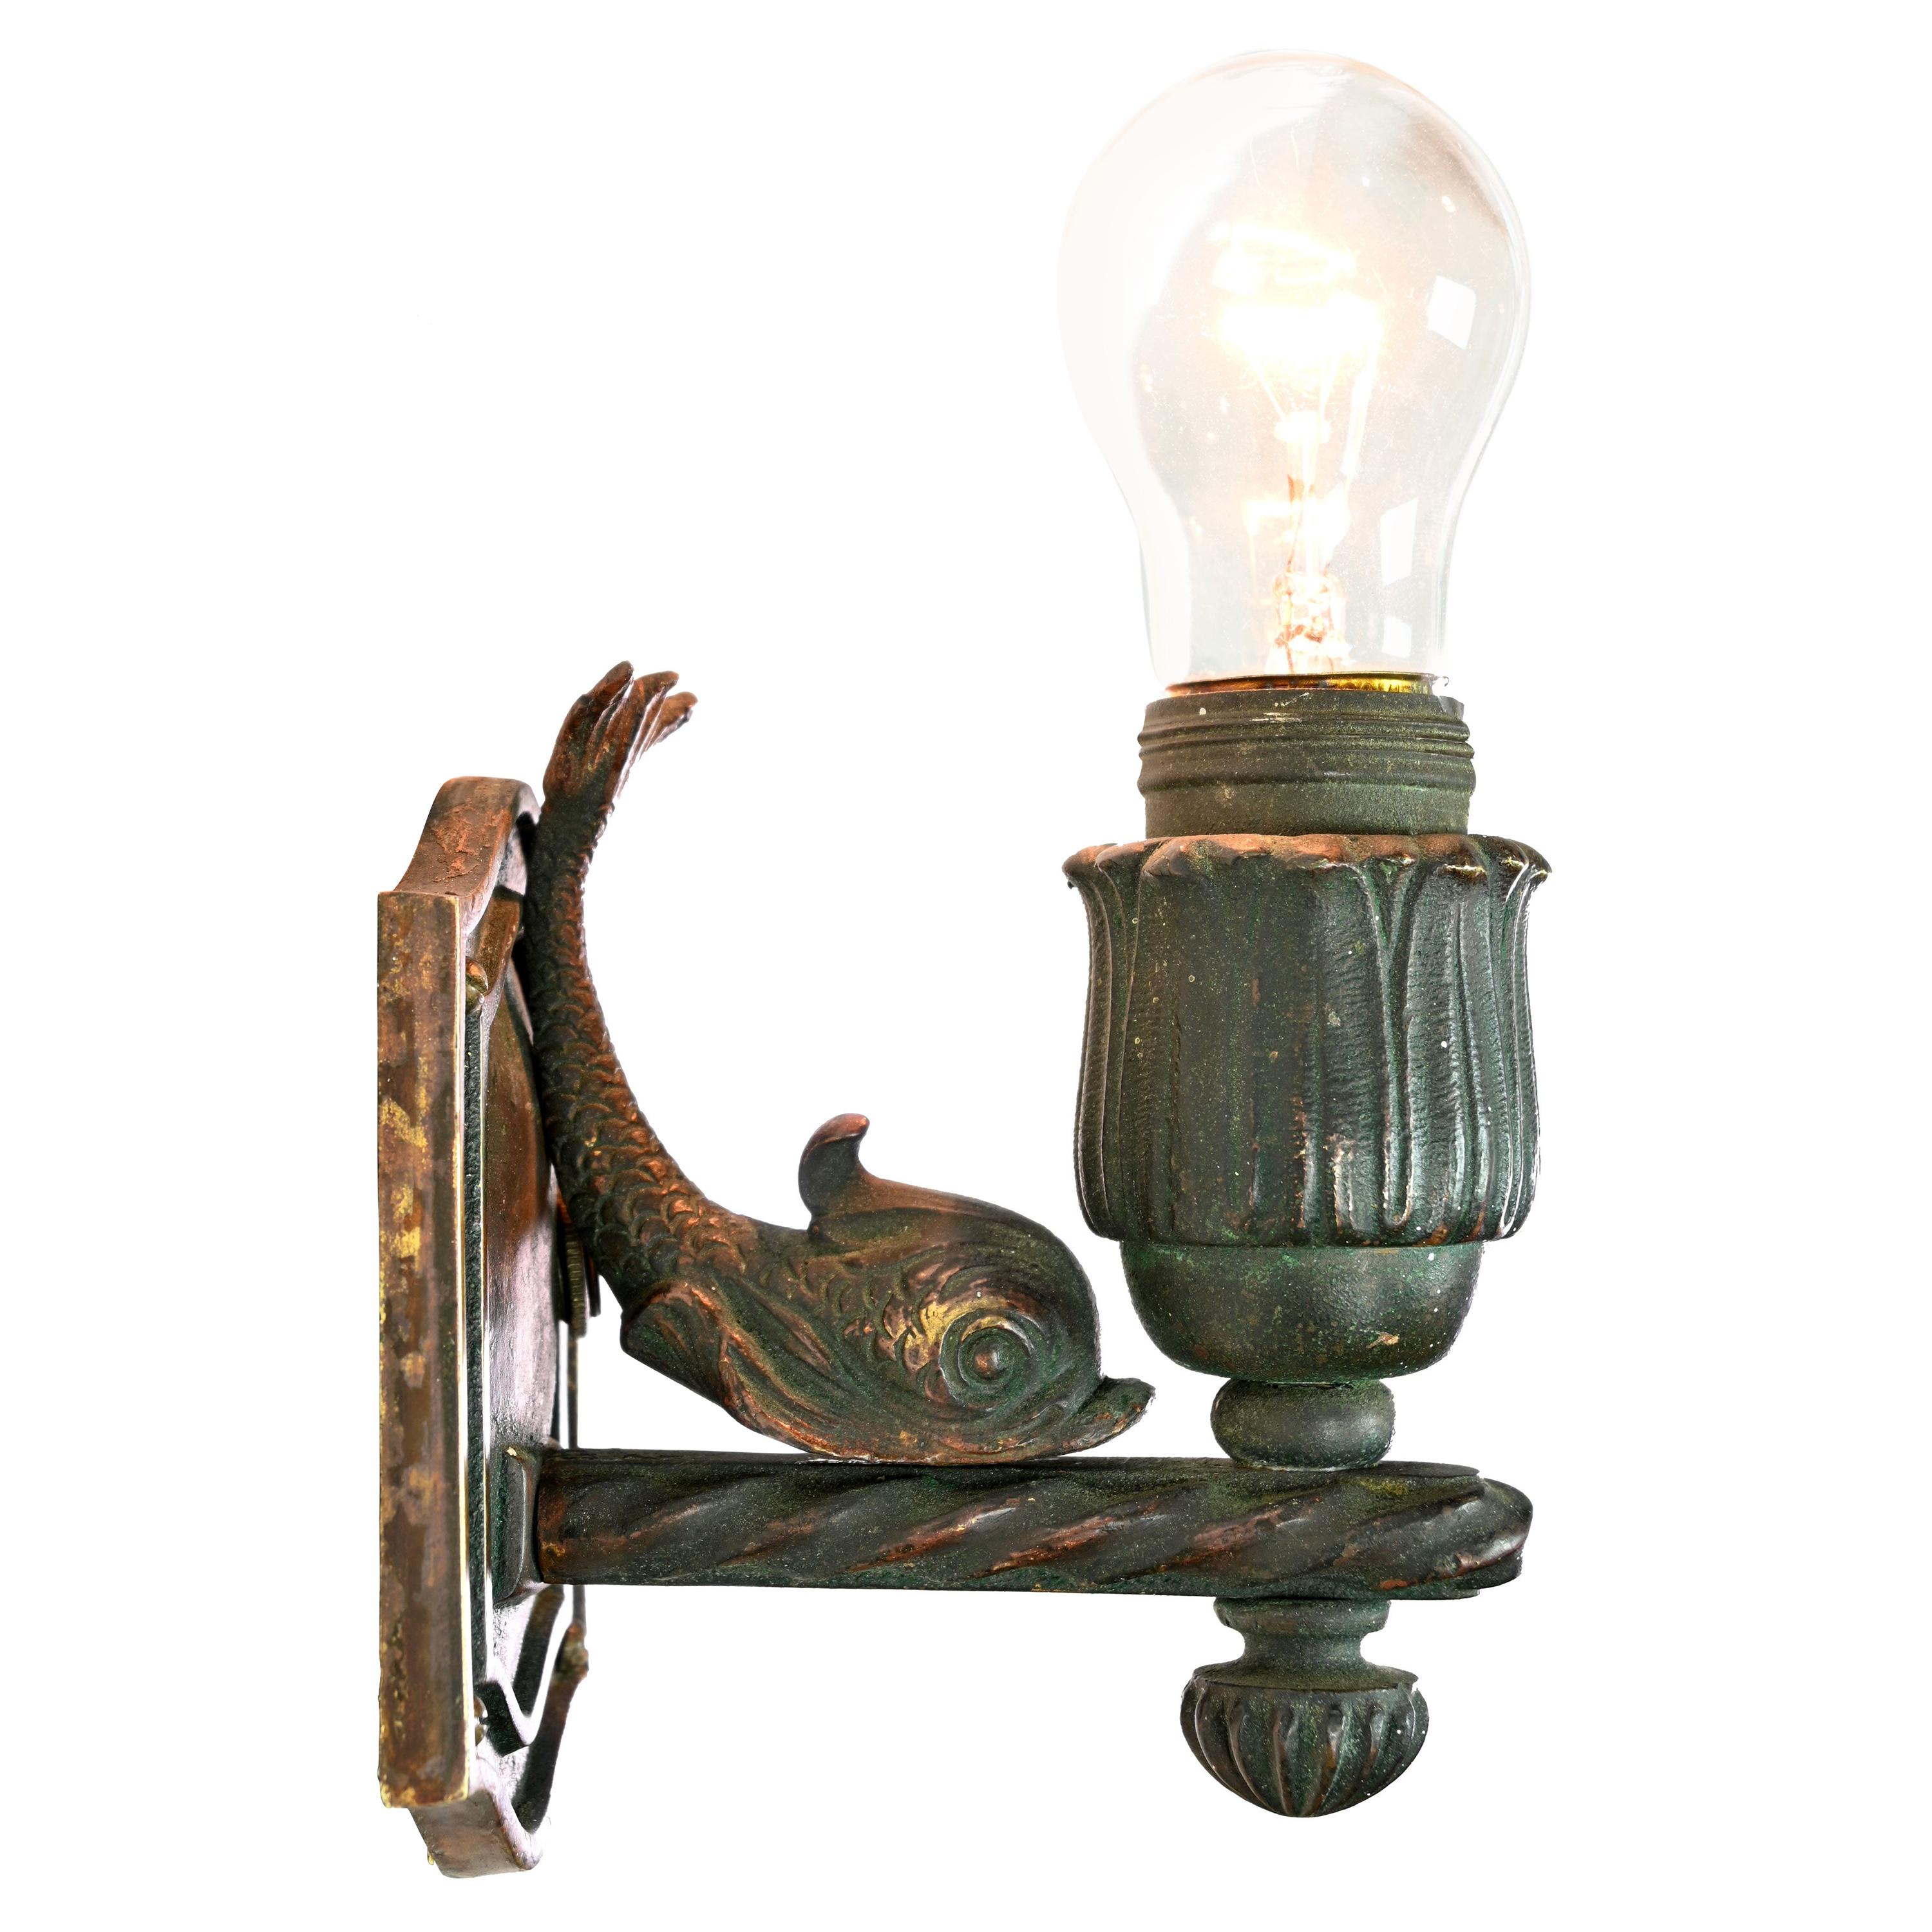 Pullman Train Car Sconce with Fish and Switch